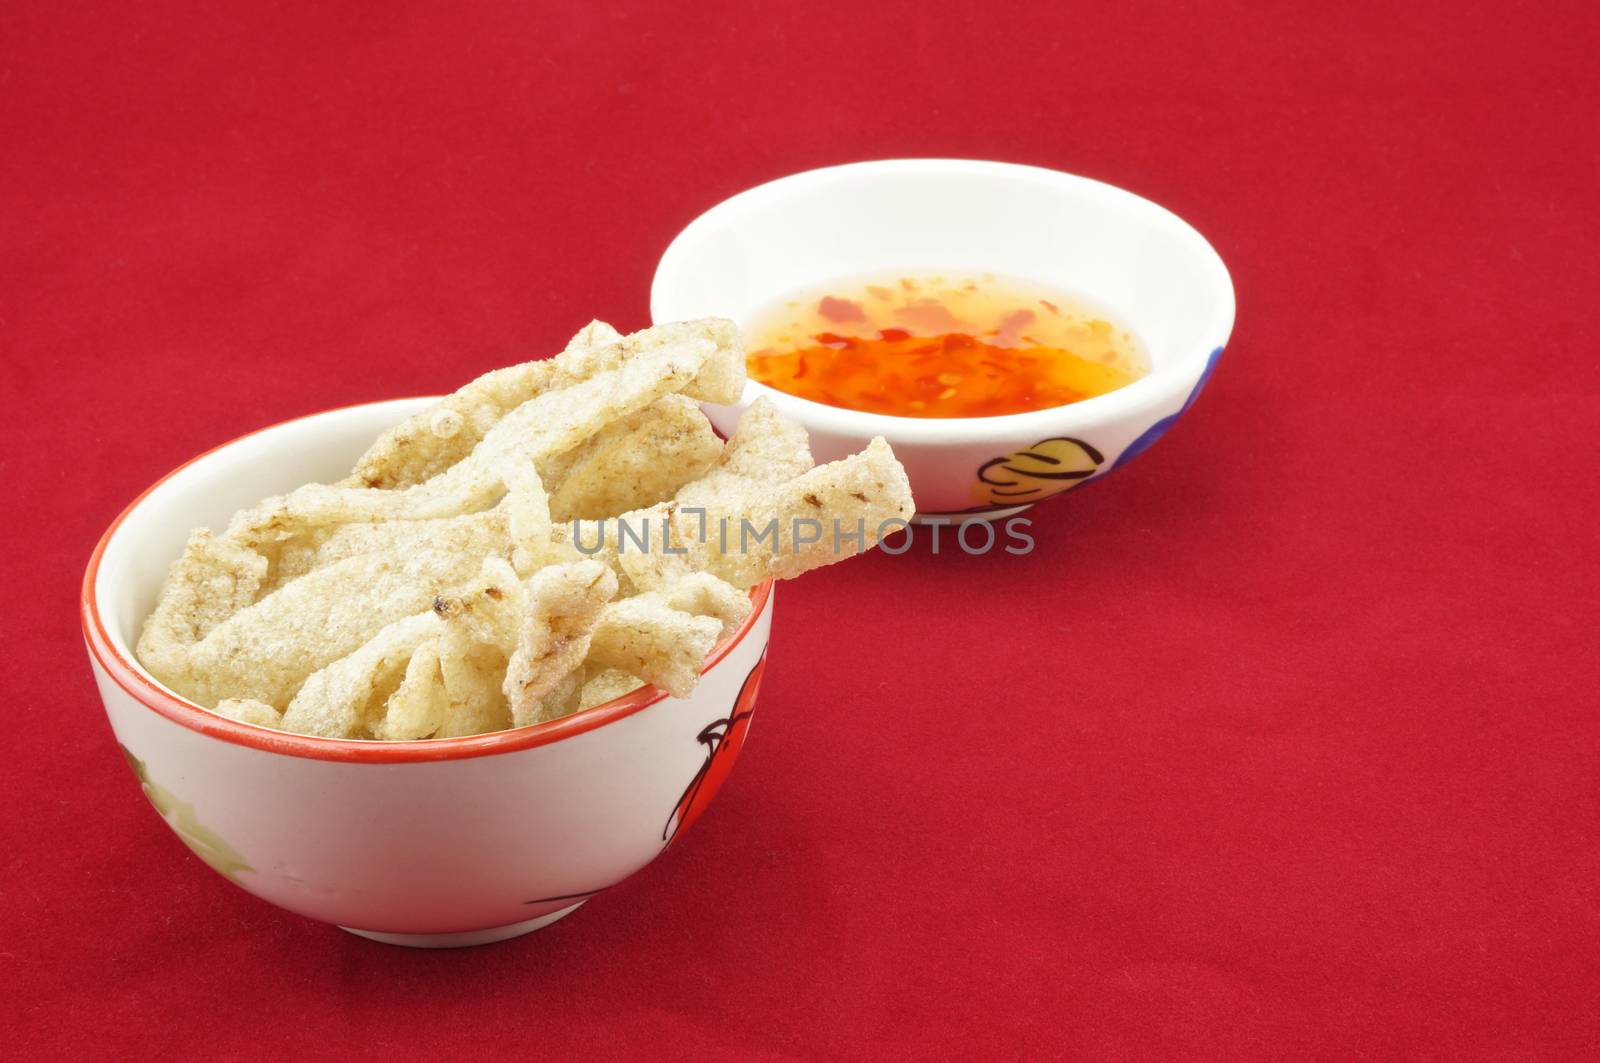 Shiitake mushroom snack in cup with chilli sauce placed on a red background.